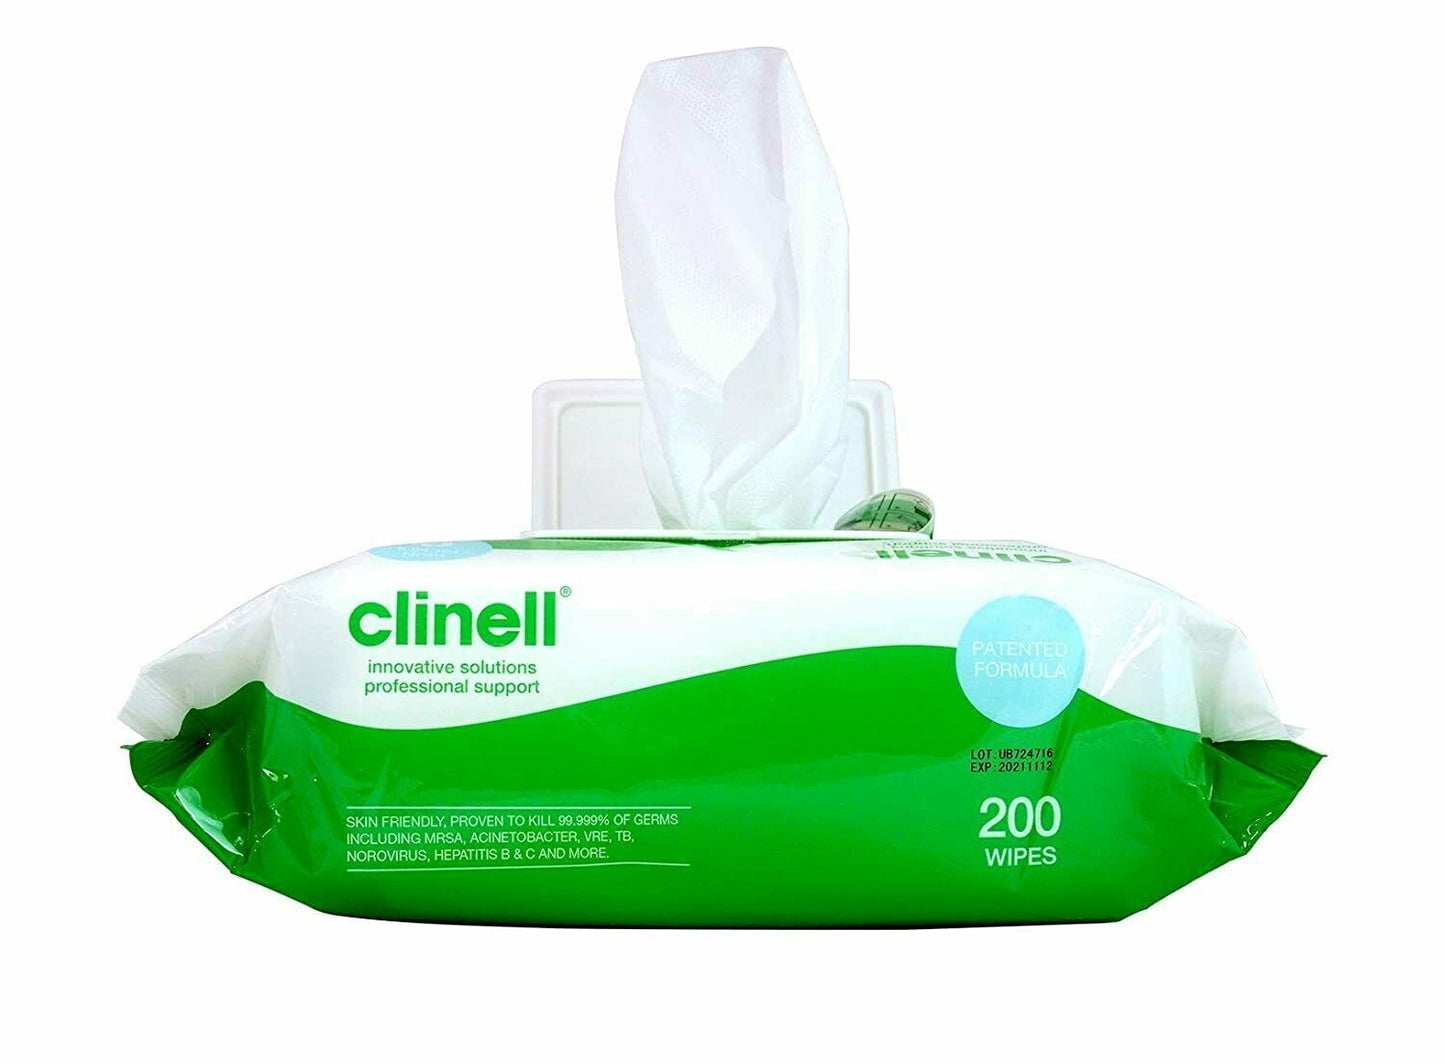 Clinell BULK BUY PACK OF SIX x 200 Wipes Cleaning Wipes Packs, renowned gold standard brand